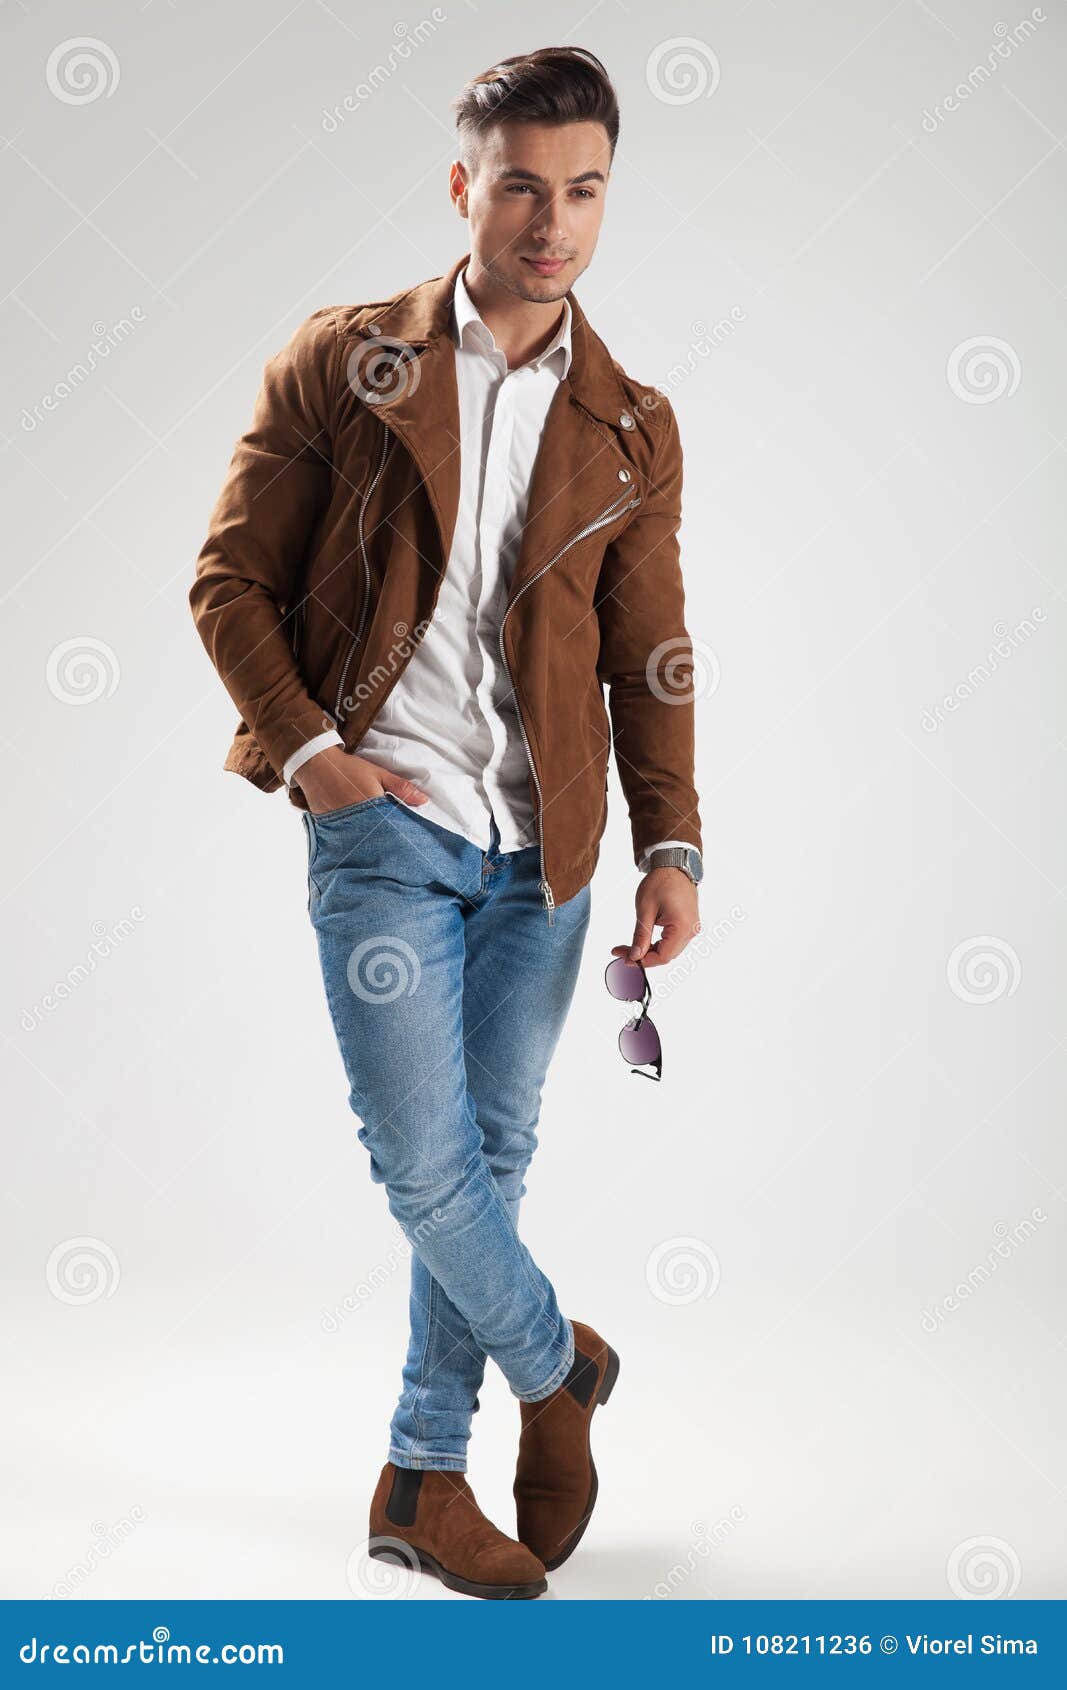 Smiling Casual Man Holding Sunglasses and Standing Stock Photo - Image ...